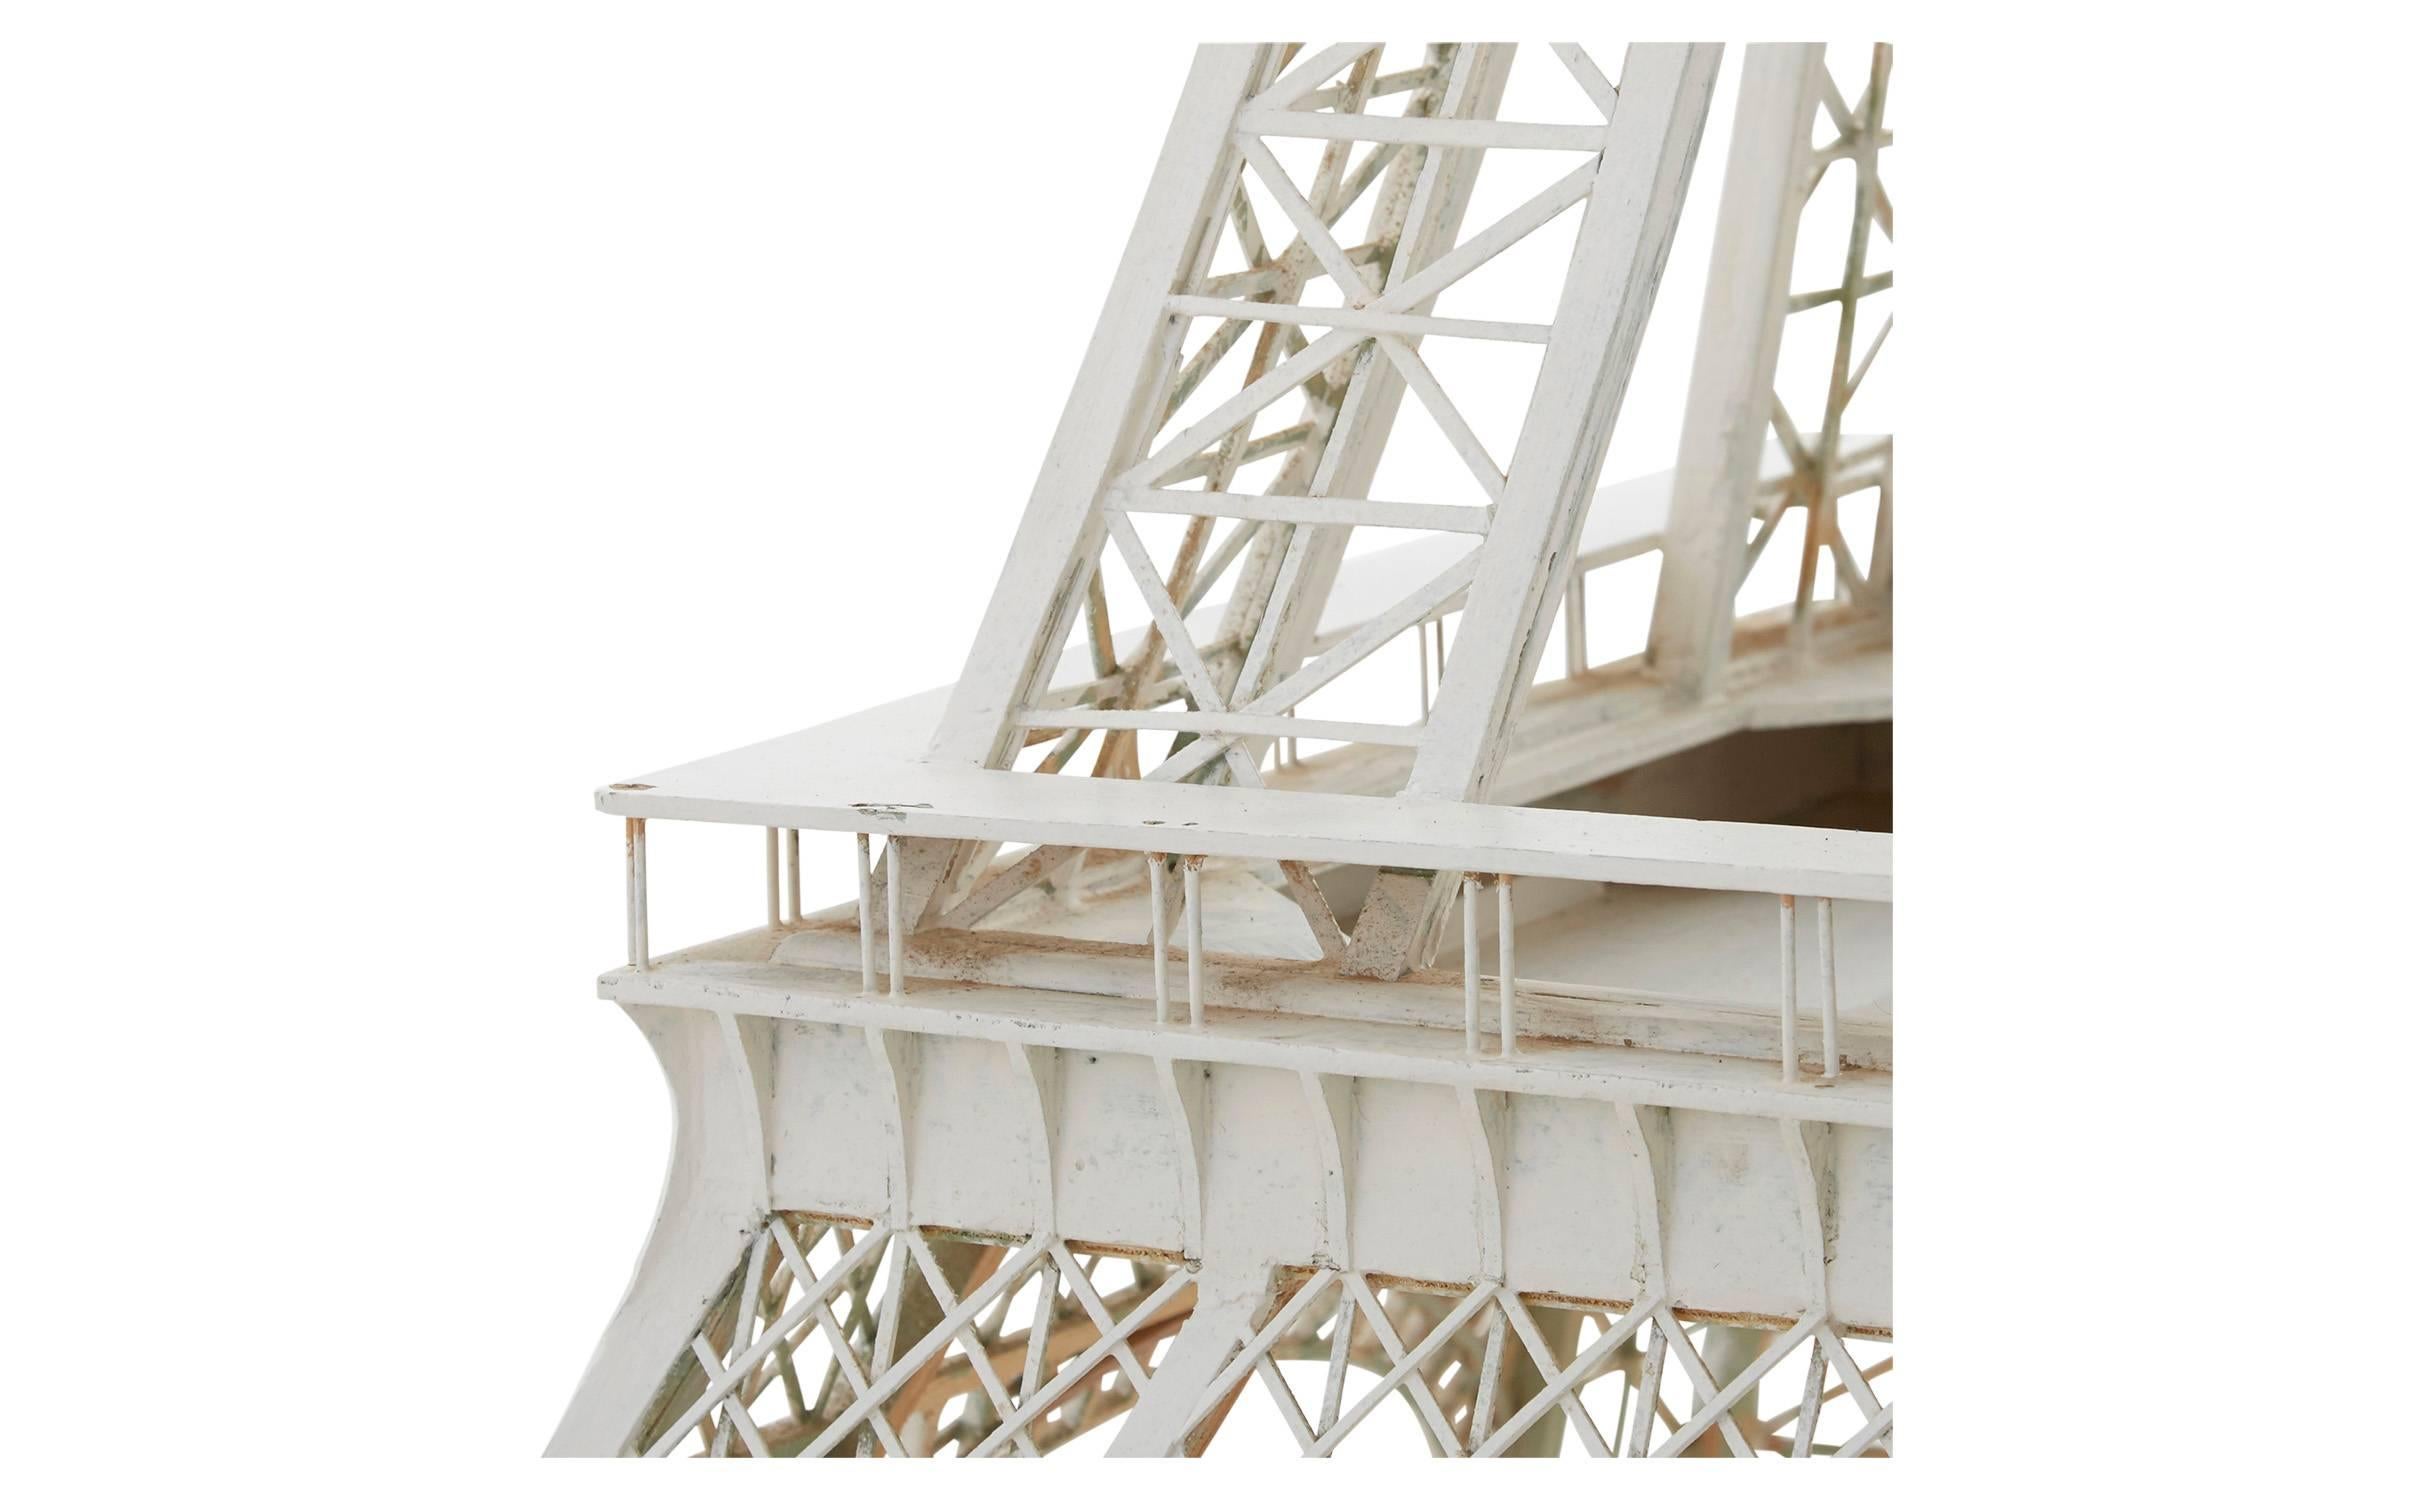 •Powder coated white wood and metal 
•Eiffel tower replica
•20th century
•France

Dimensions:
29.5 D x 29.5 W x 73 H